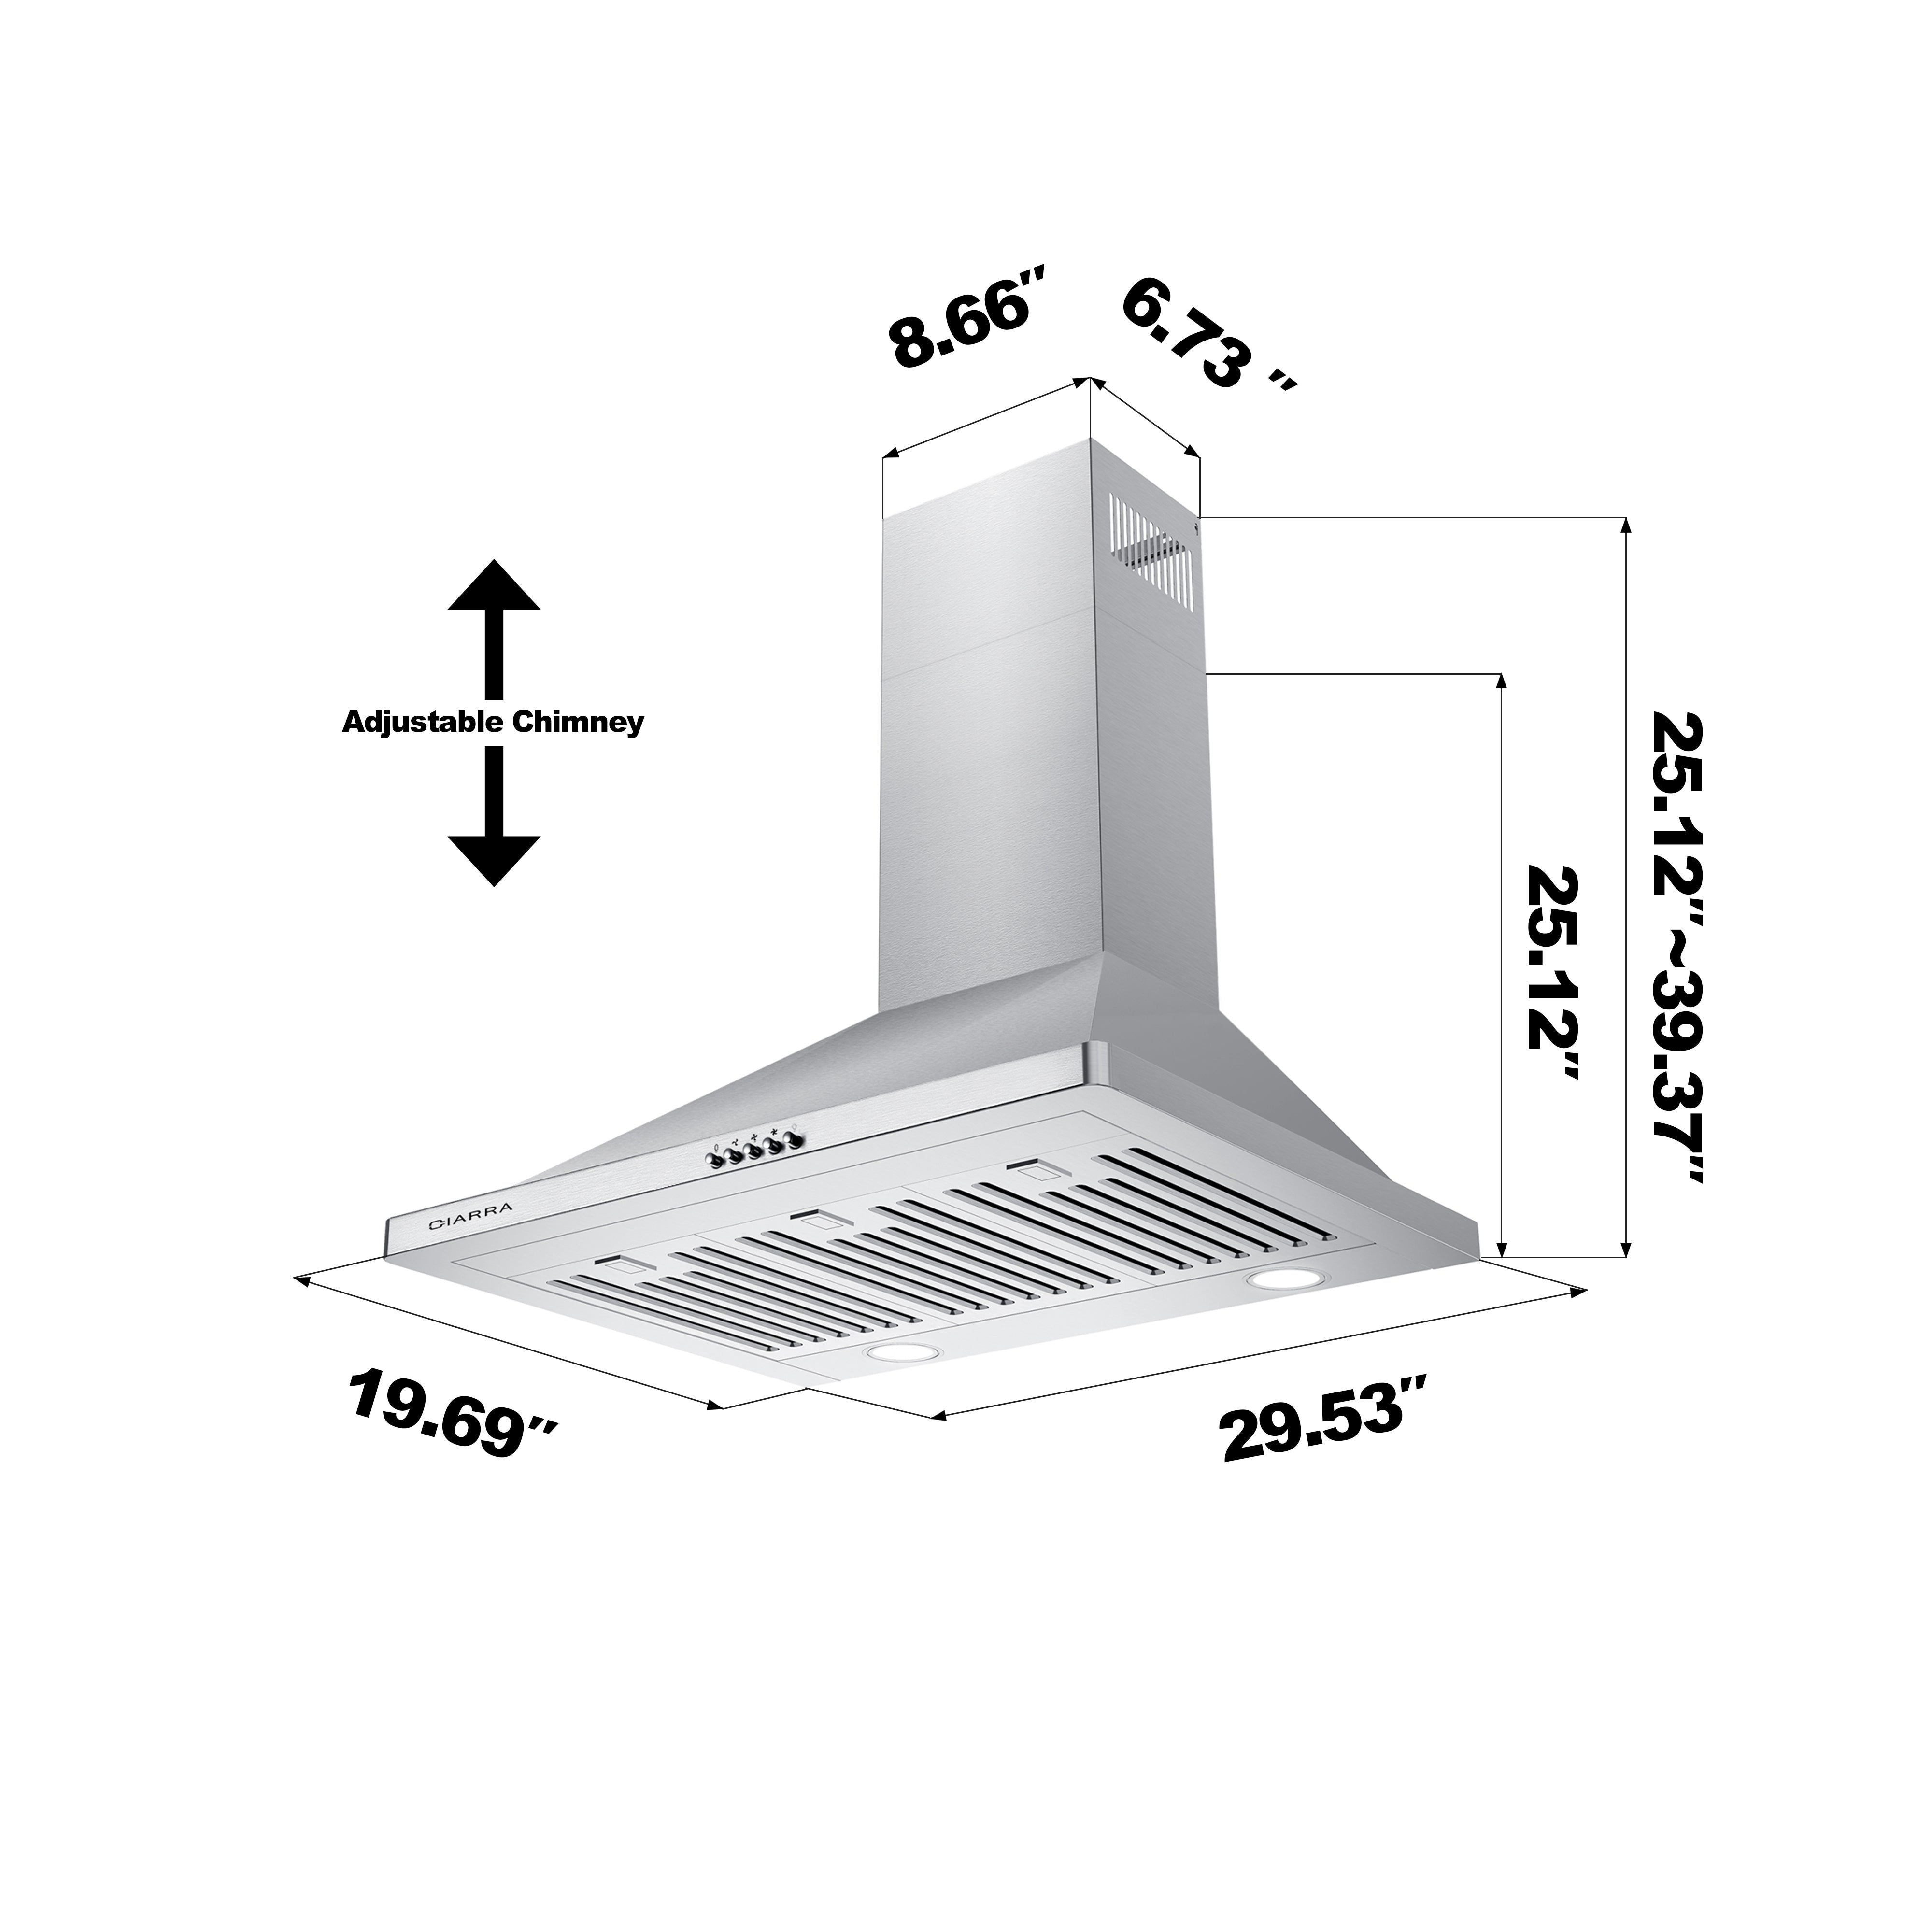 CIARRA CAS75302 Ductless Range Hood 30 inch 450 cFM Wall Mount Vent Hood  for Stove with Permanent Filter, 3 Speed Fan in Stainless Steel cIARRA